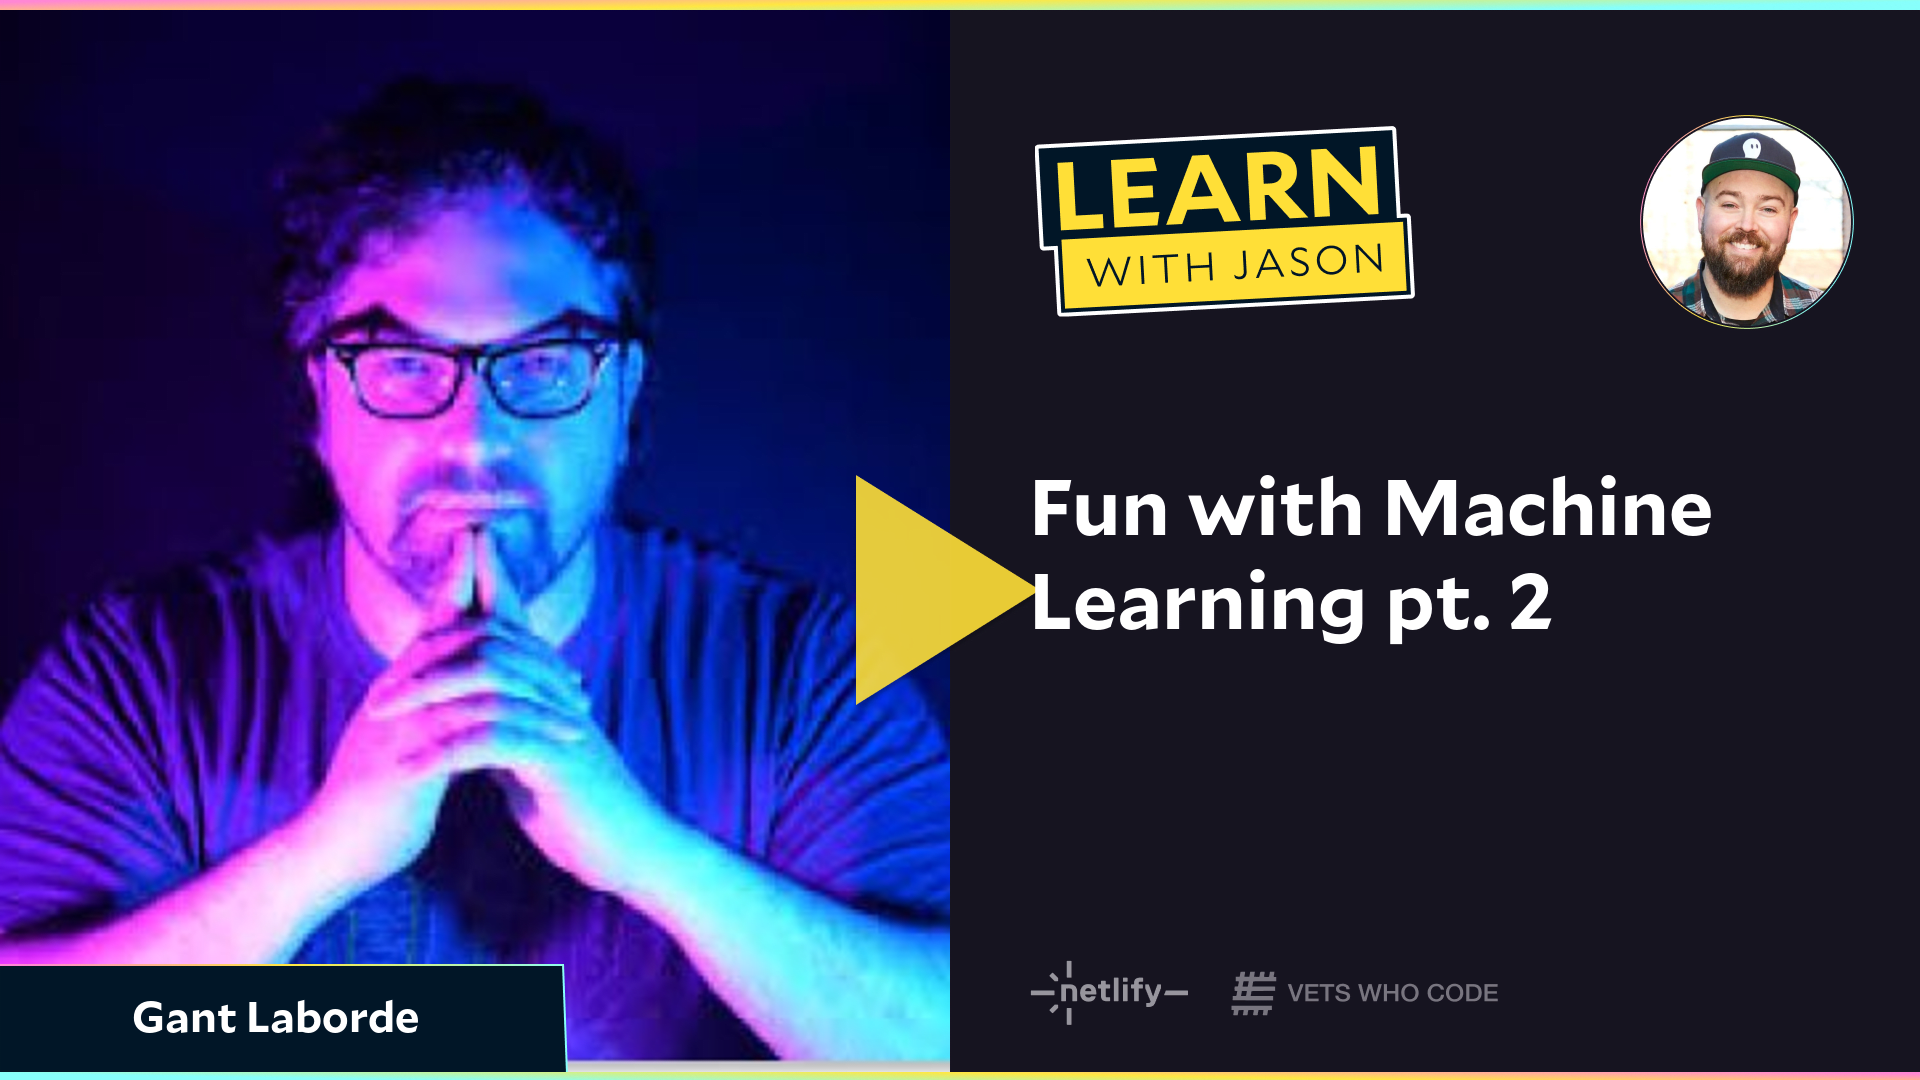 Fun with Machine Learning pt. 2 (with Gant Laborde)